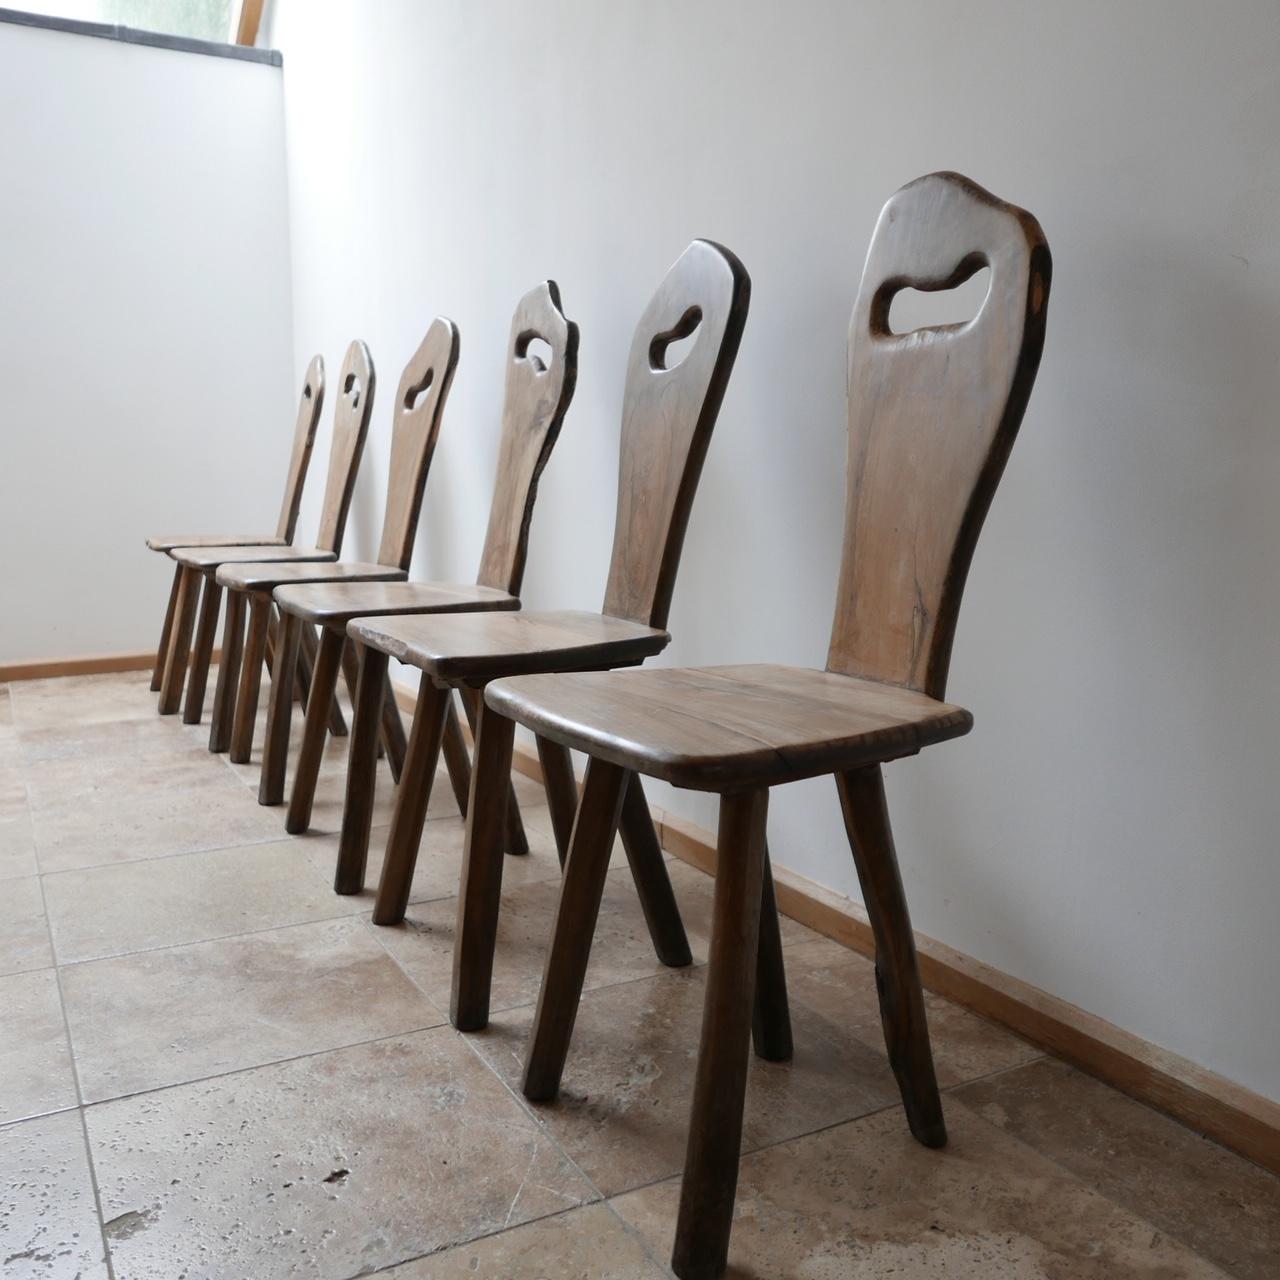 A SET OF SIX dining chairs by Tony Bain in Vallauris wood,

circa 1960s-1970s, France

Almost Folk Art like, these free form chairs are immensely stylish, each one a piece of art in it's own right. 

Scarce chairs. 

Priced and sold